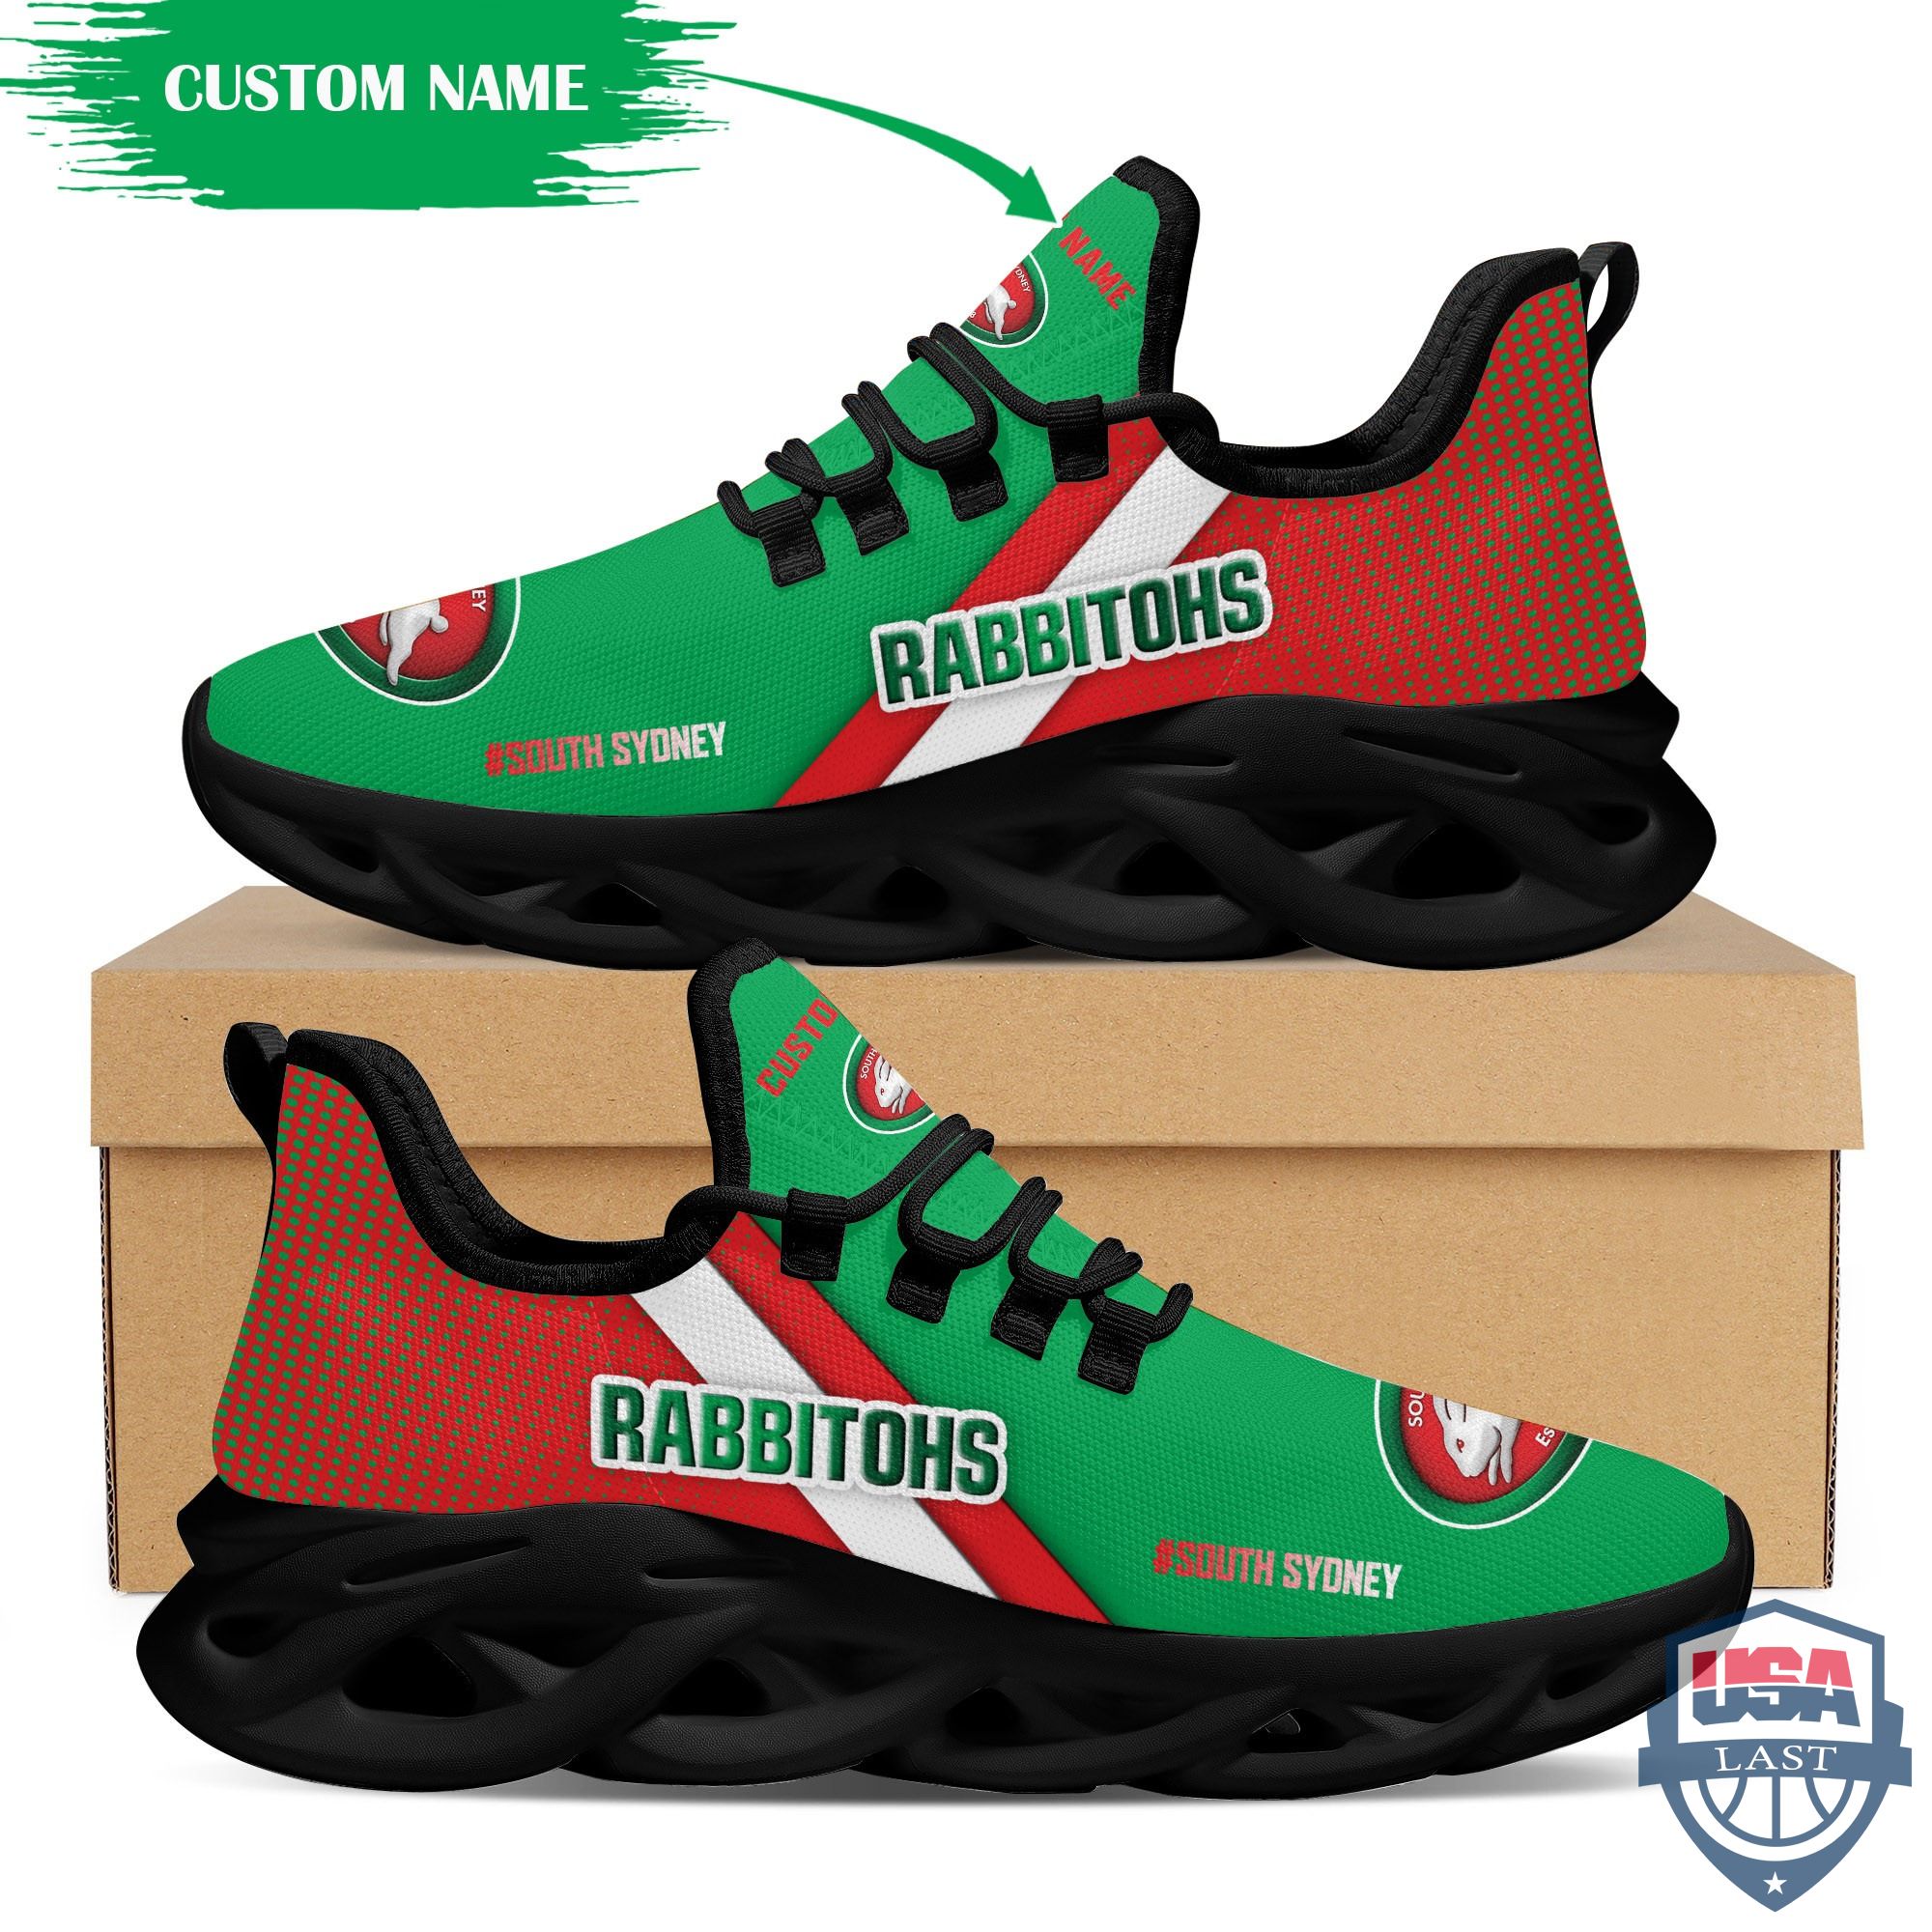 1HY1L4or-T140122-159xxxPersonalized-South-Sydney-Rabbitohs-Max-Soul-Shoes.jpg